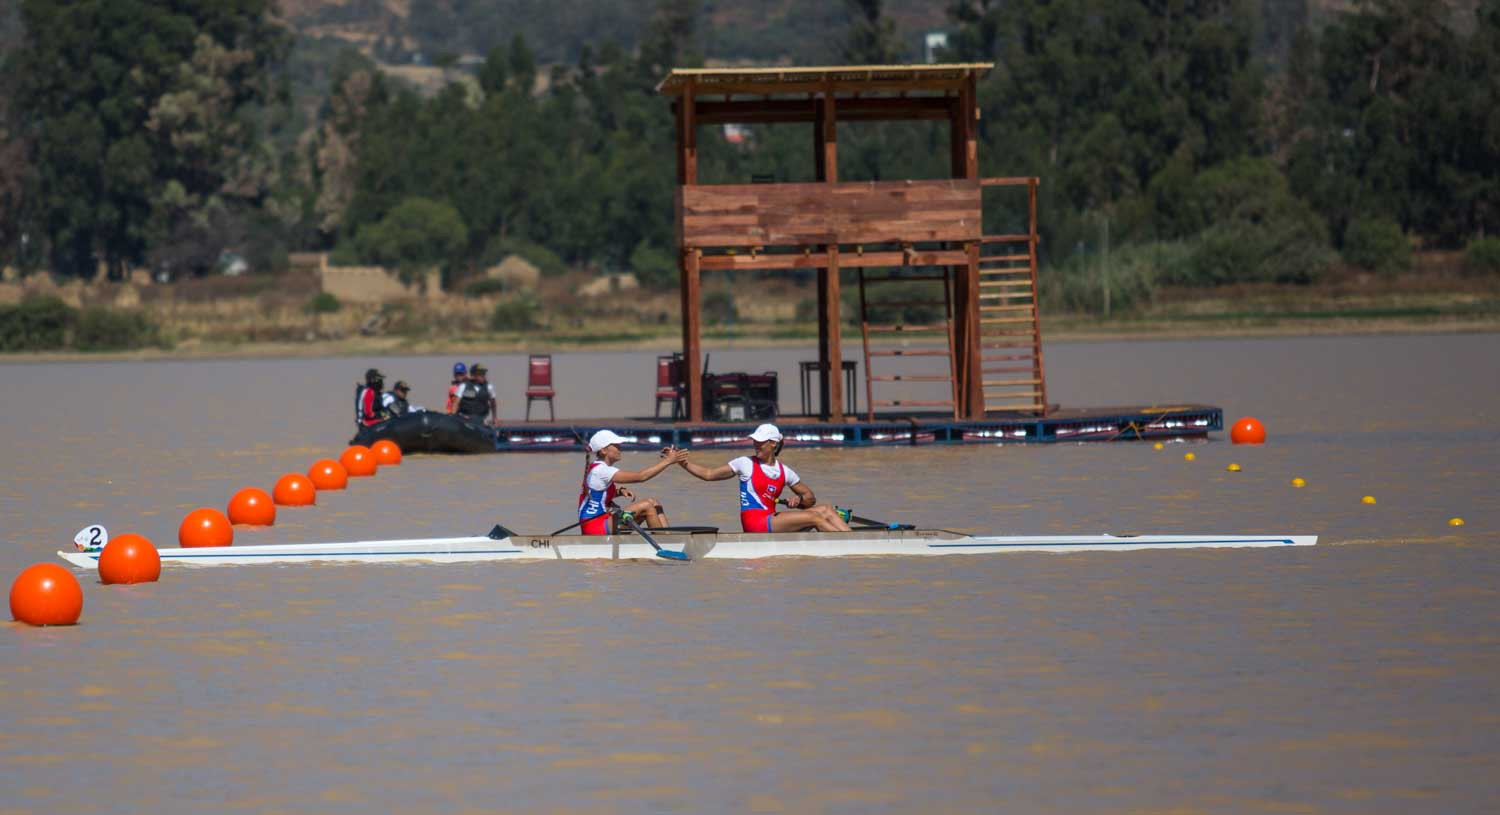 Rowing is among other sports featuring at the South American Games ©Cochabamba 2018